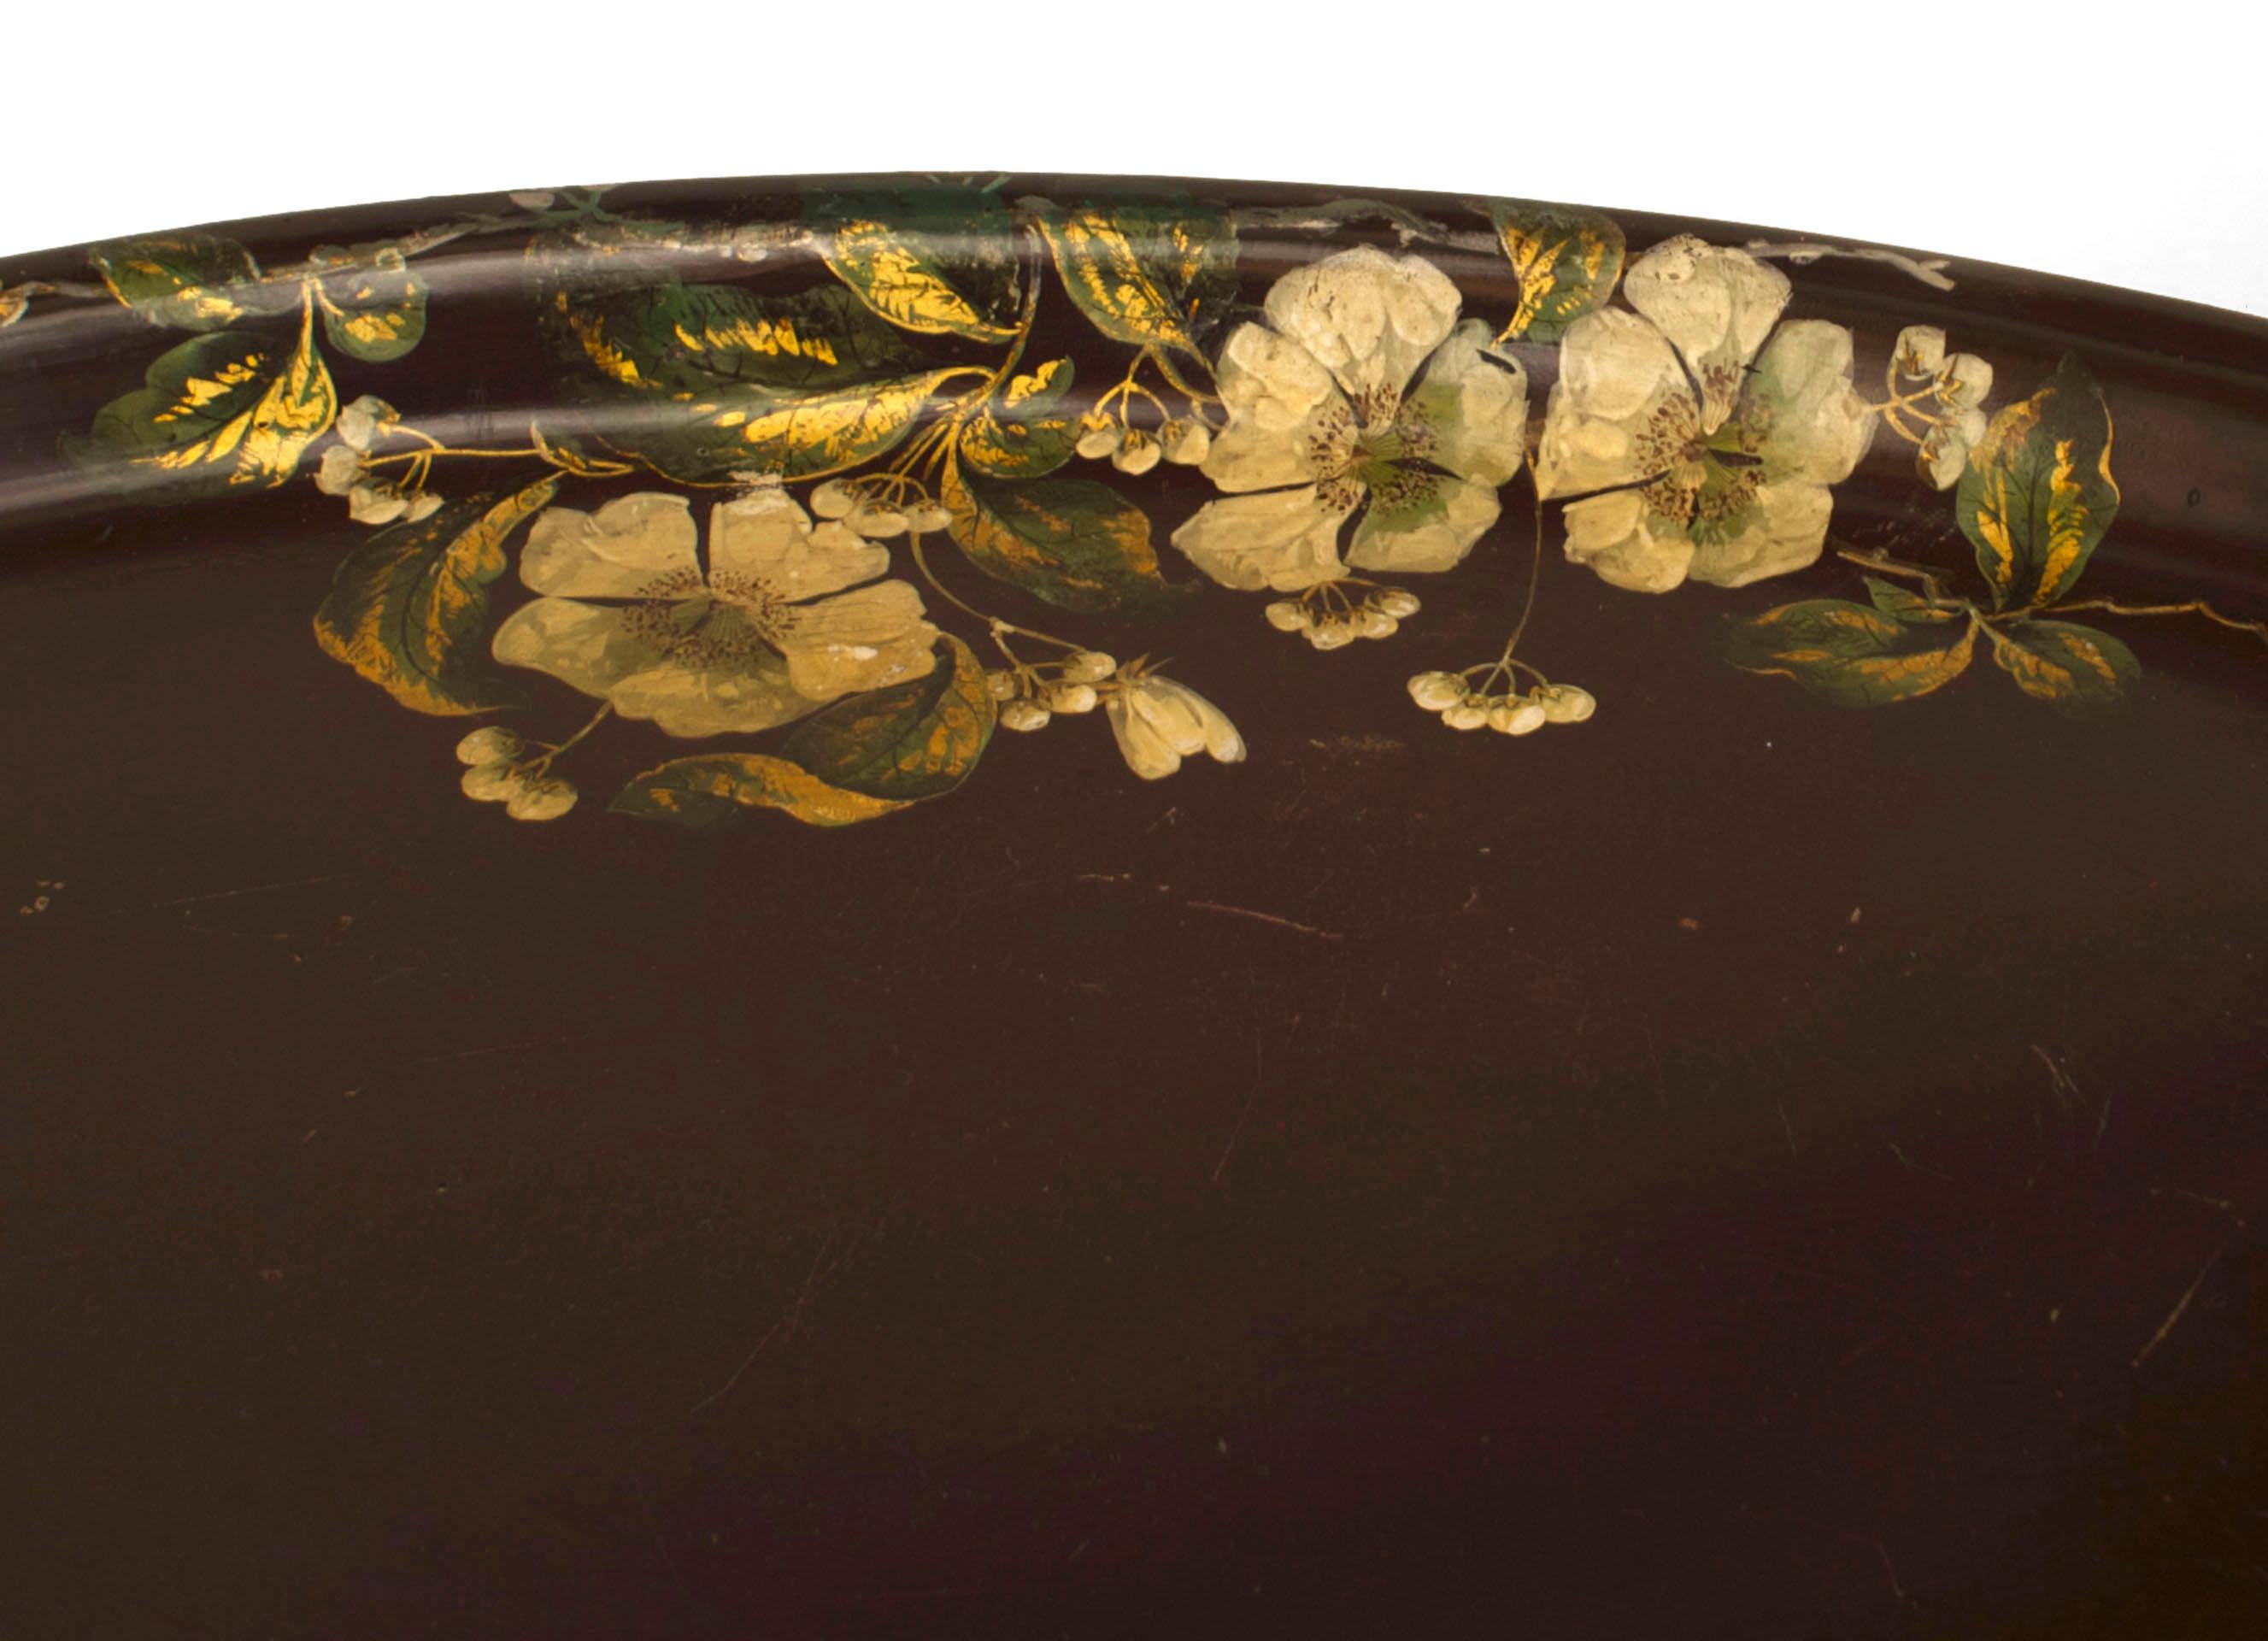 English Victorian-Style (20th Century) oval papier-mache dark maroon tray top coffee table with a floral decorative border and on an ebonized faux bamboo base.
